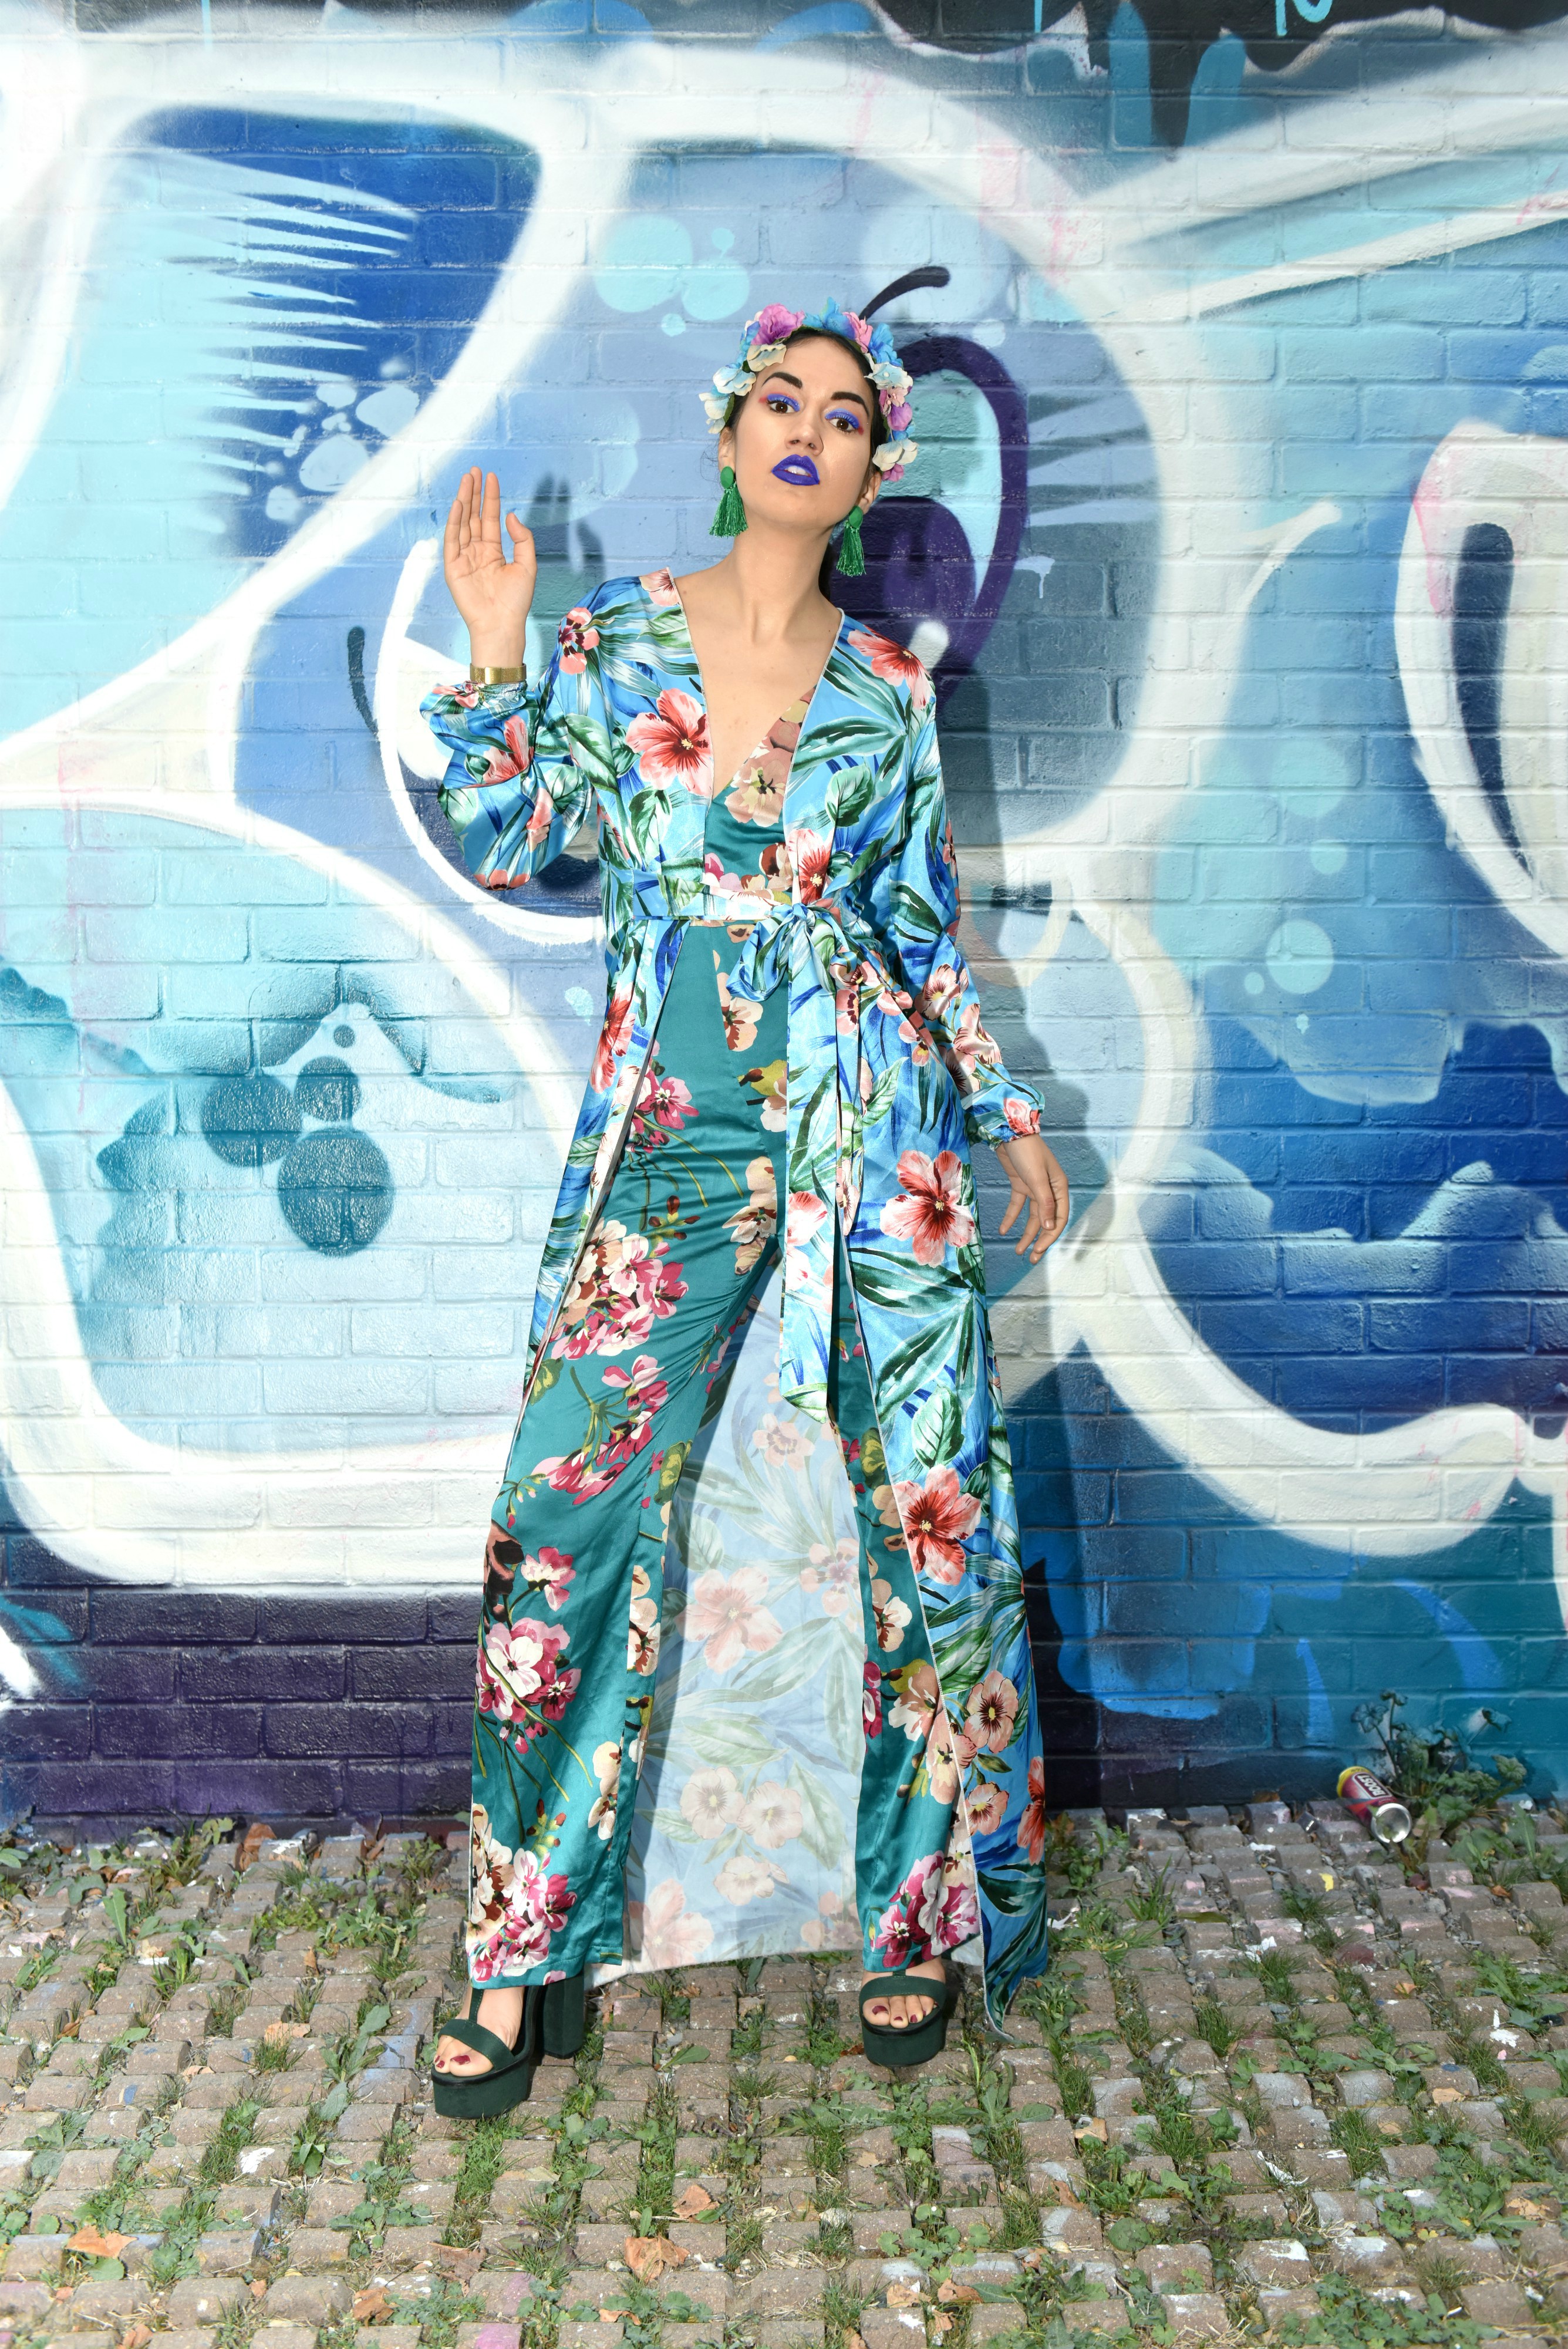 <img src="ana.jpg" alt="ana green floral jumpsuit in love with travel"/> 